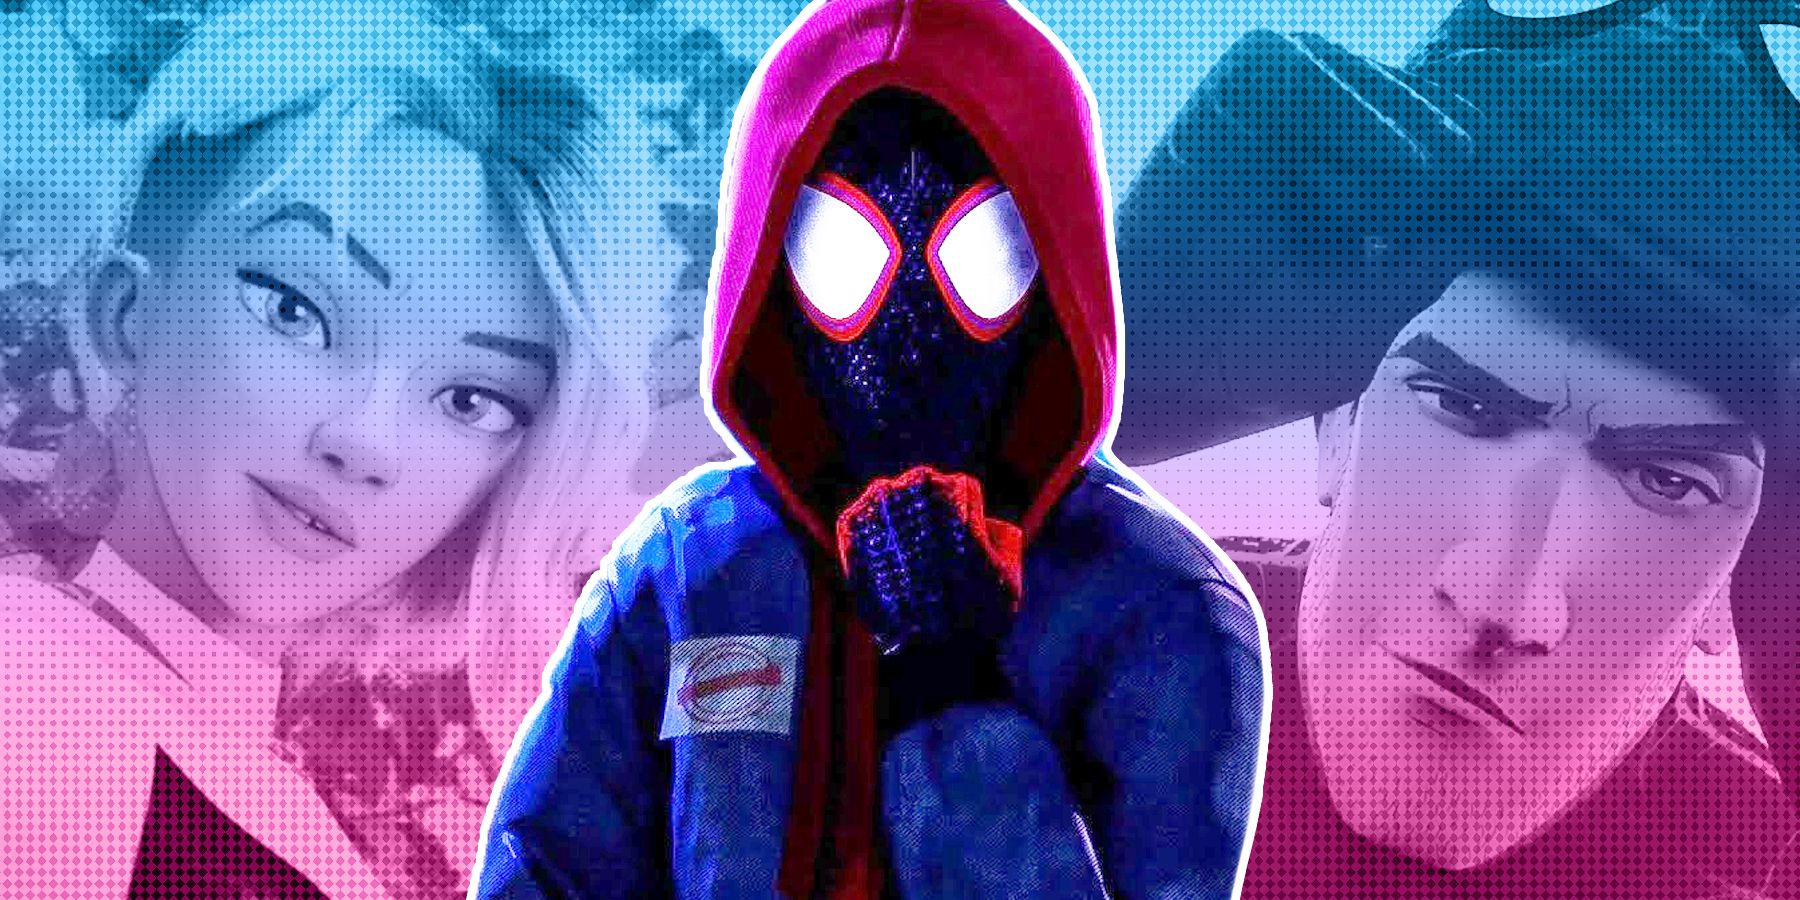 Spider-Gwen, Miles Morales as Spider-Man and Peter Parker's Spider-Man as seen in Spider-Man: Into the Spider-Verse